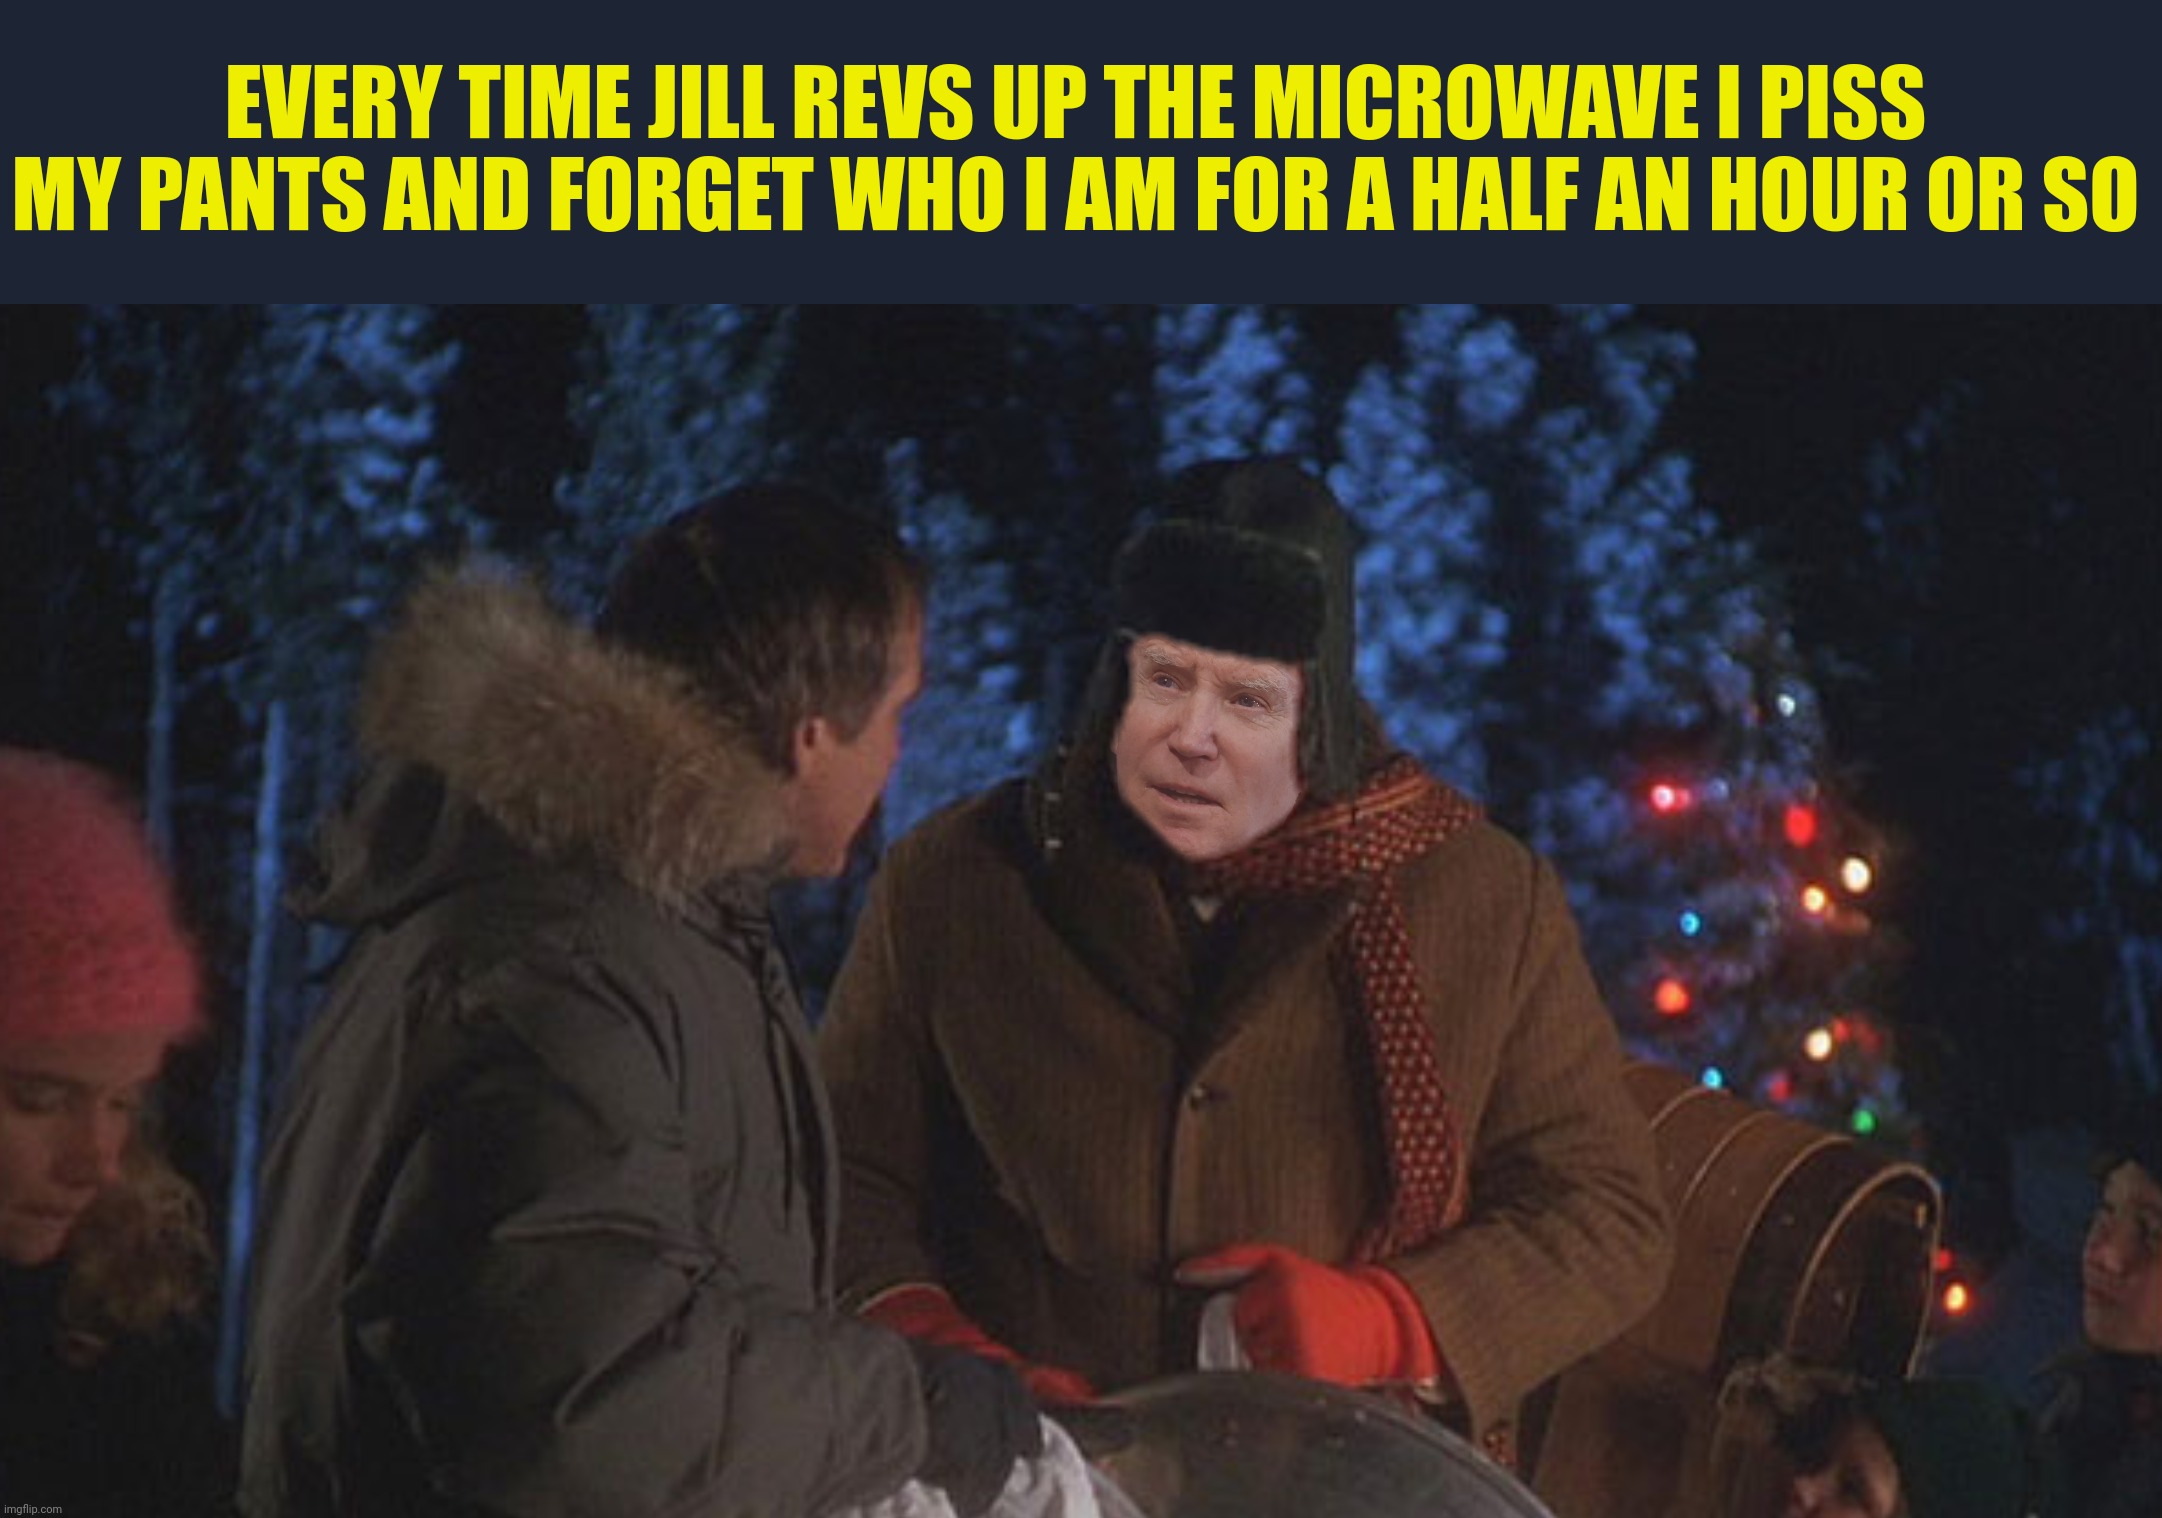 EVERY TIME JILL REVS UP THE MICROWAVE I PISS MY PANTS AND FORGET WHO I AM FOR A HALF AN HOUR OR SO | made w/ Imgflip meme maker